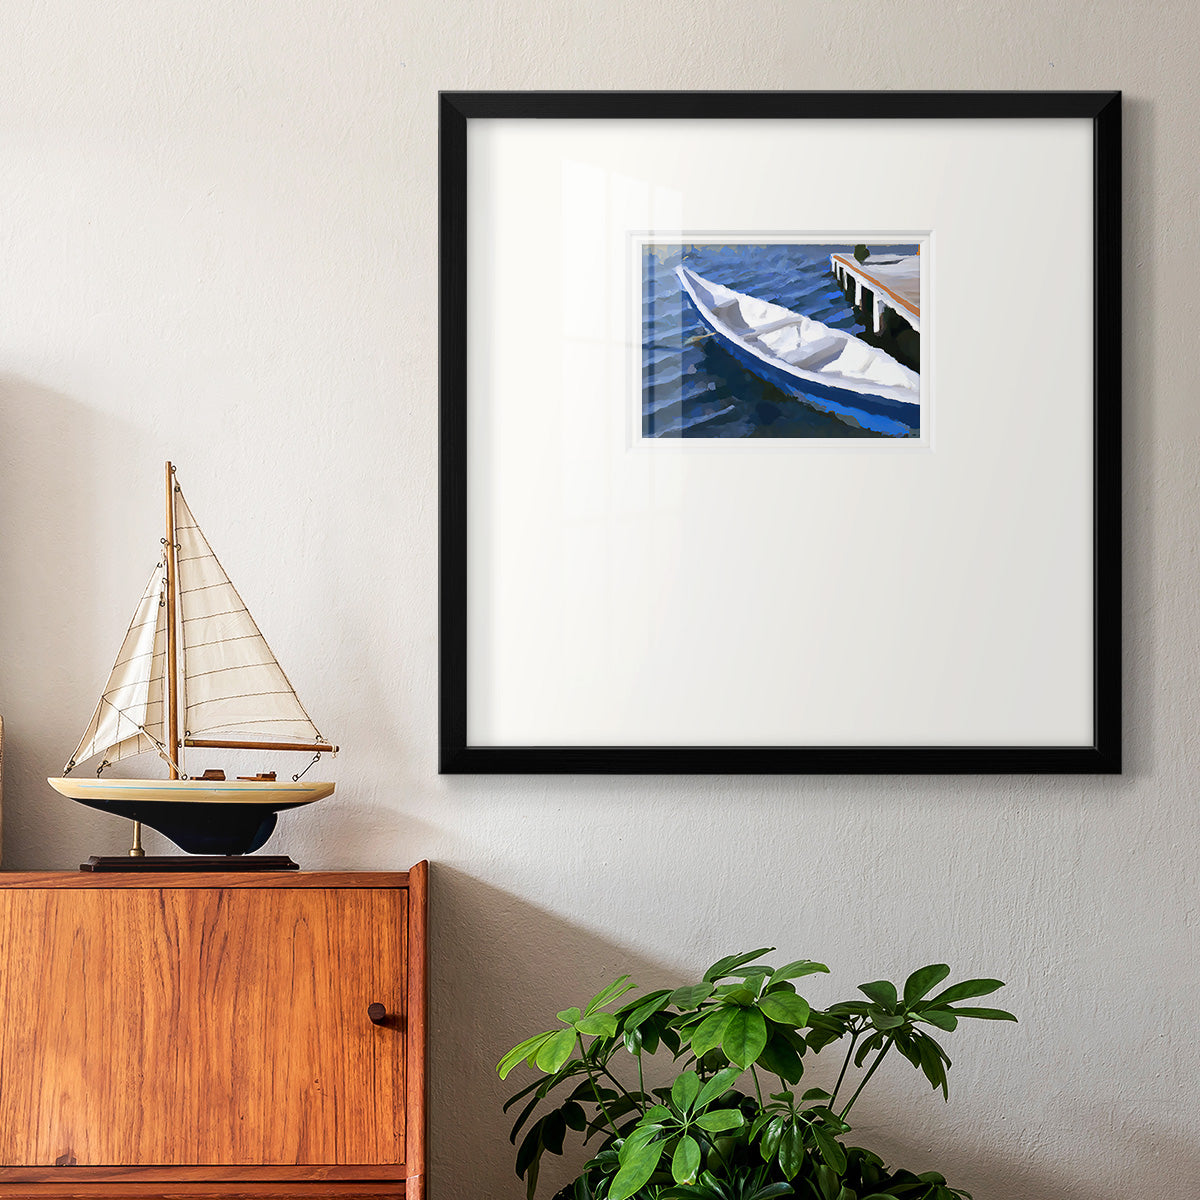 Colorful Rowboat IV Premium Framed Print Double Matboard